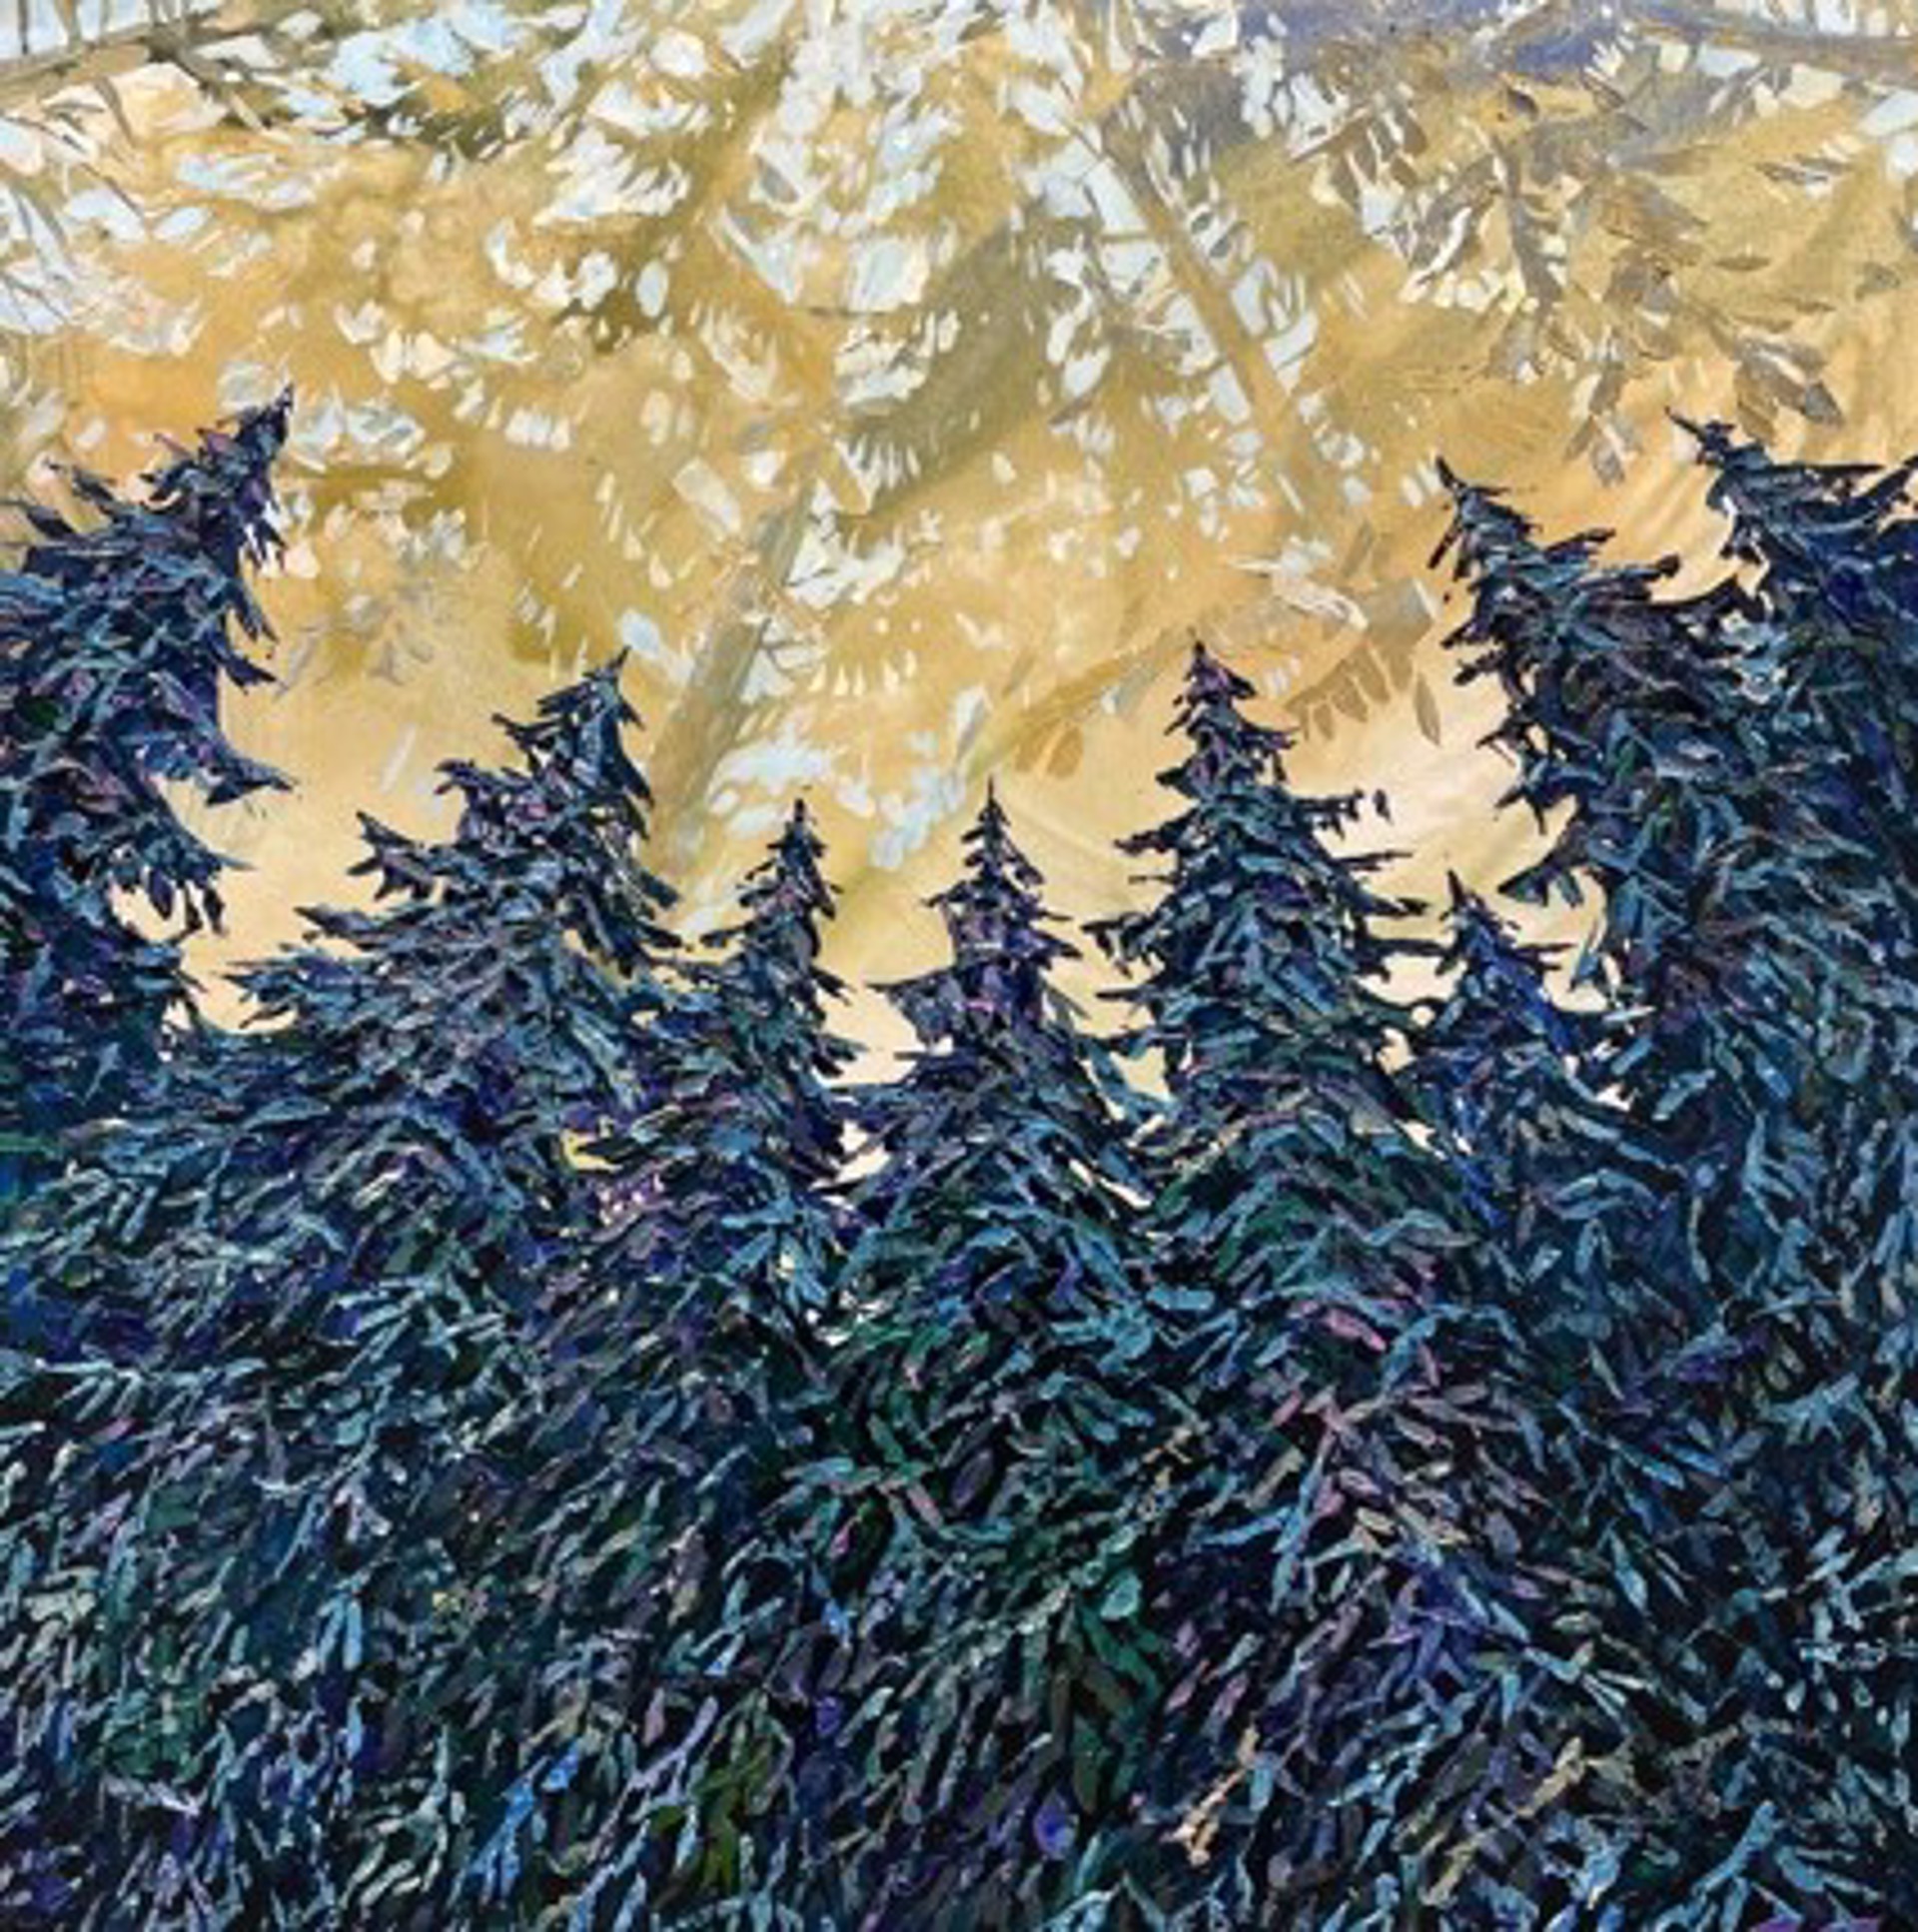 Looking Up Pines by Maya Eventov